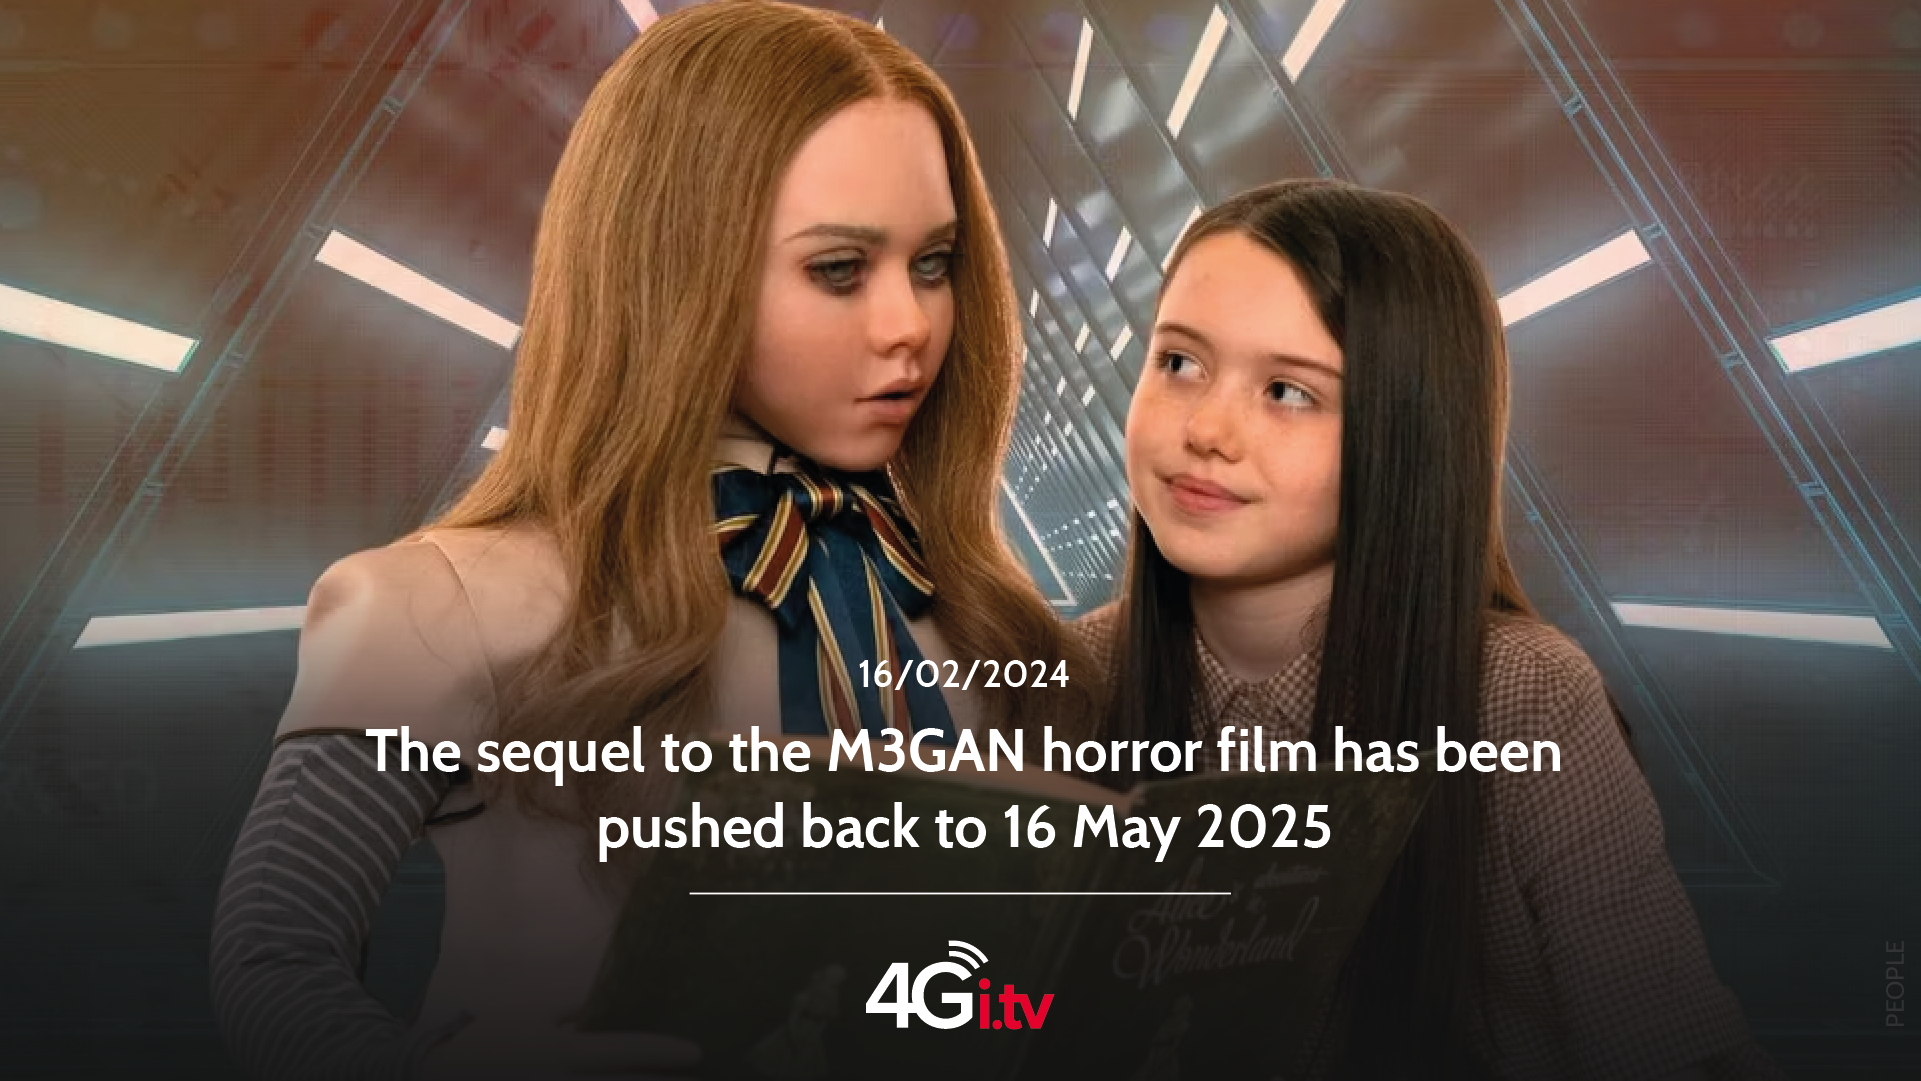 Подробнее о статье The sequel to the M3GAN horror film has been pushed back to 16 May 2025 